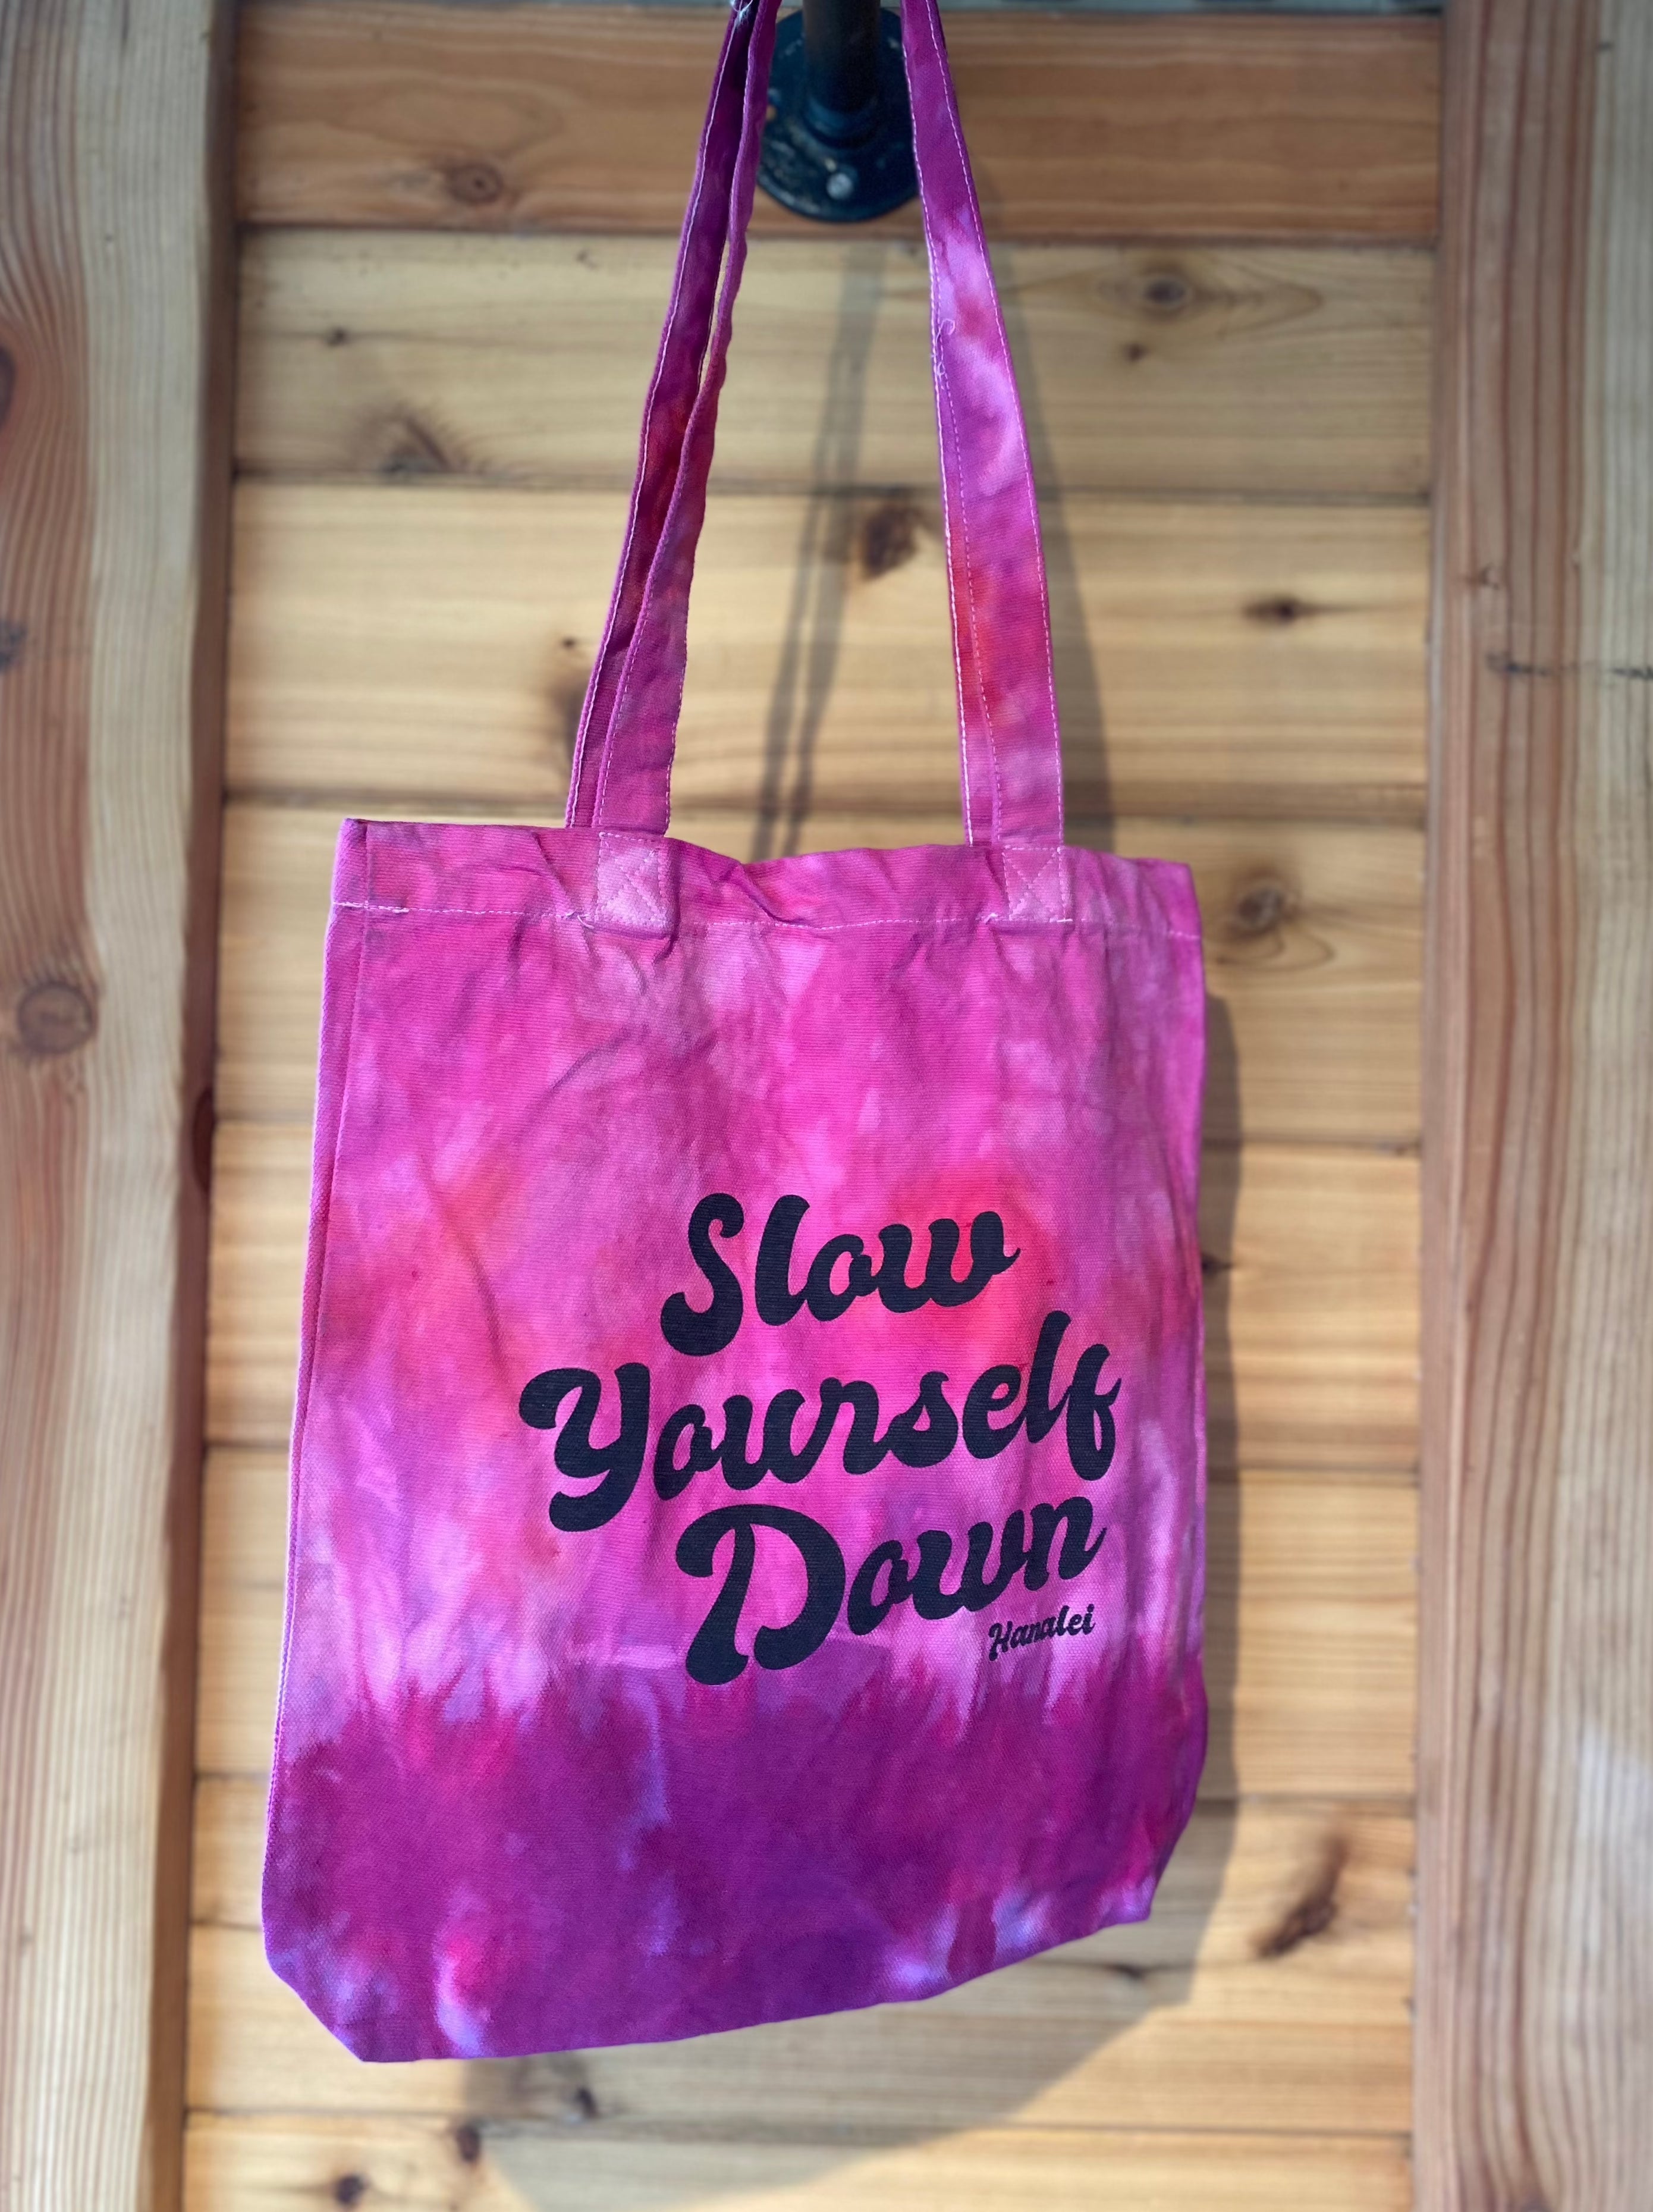 Locally Tie Dyed Tote Bags